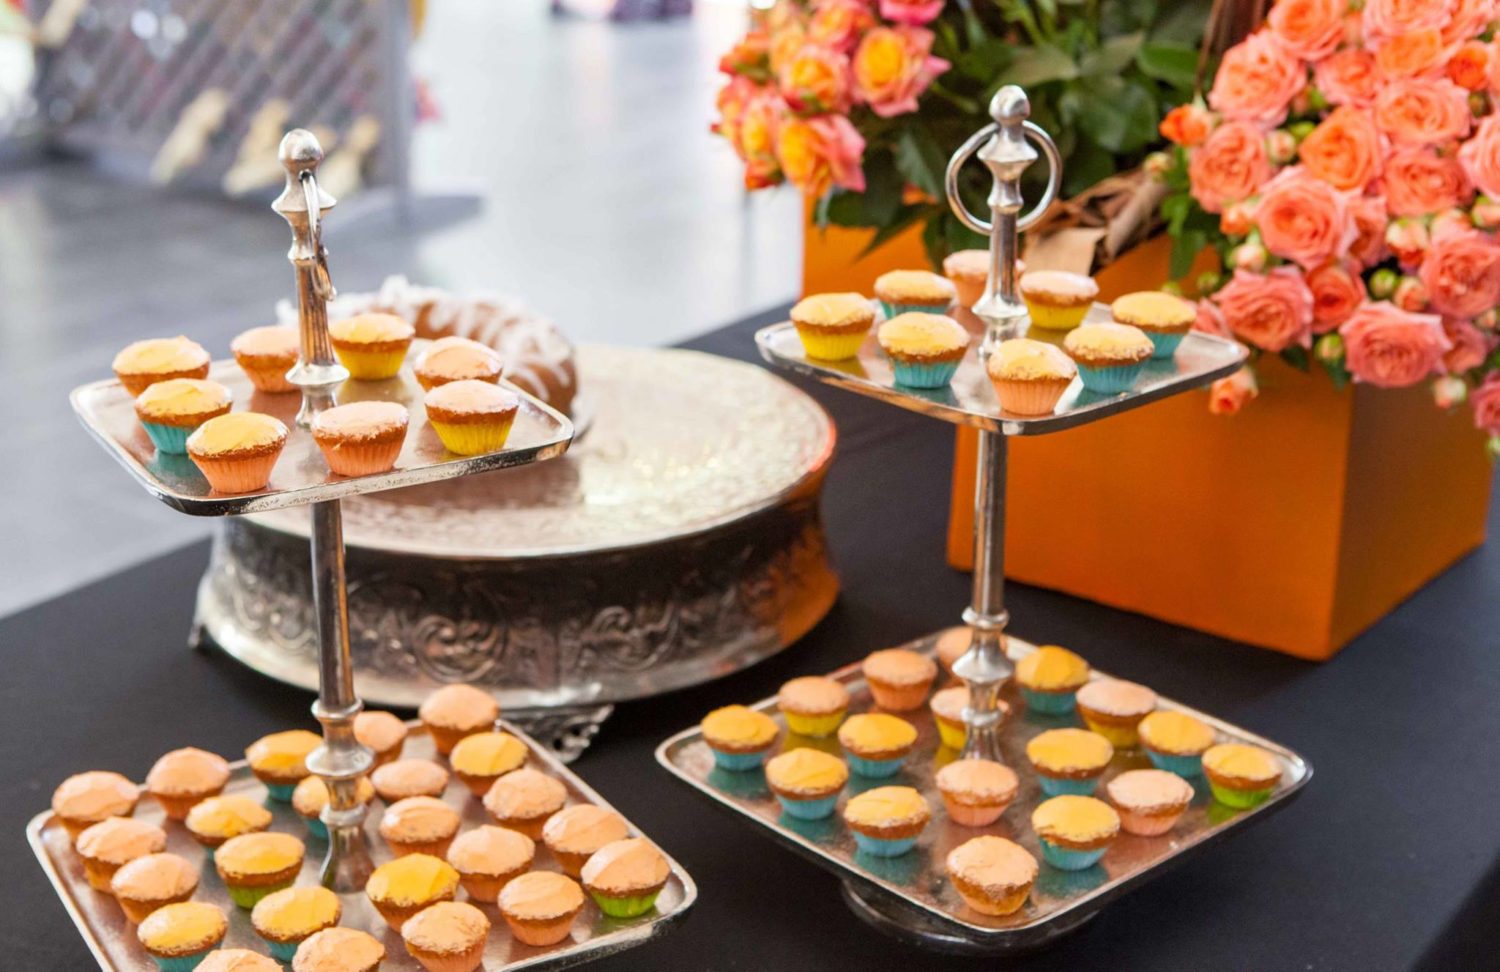 Inside the 2019 Nairobi Fashion High Tea, Where the Decor Was Designed to Surprise and Delight